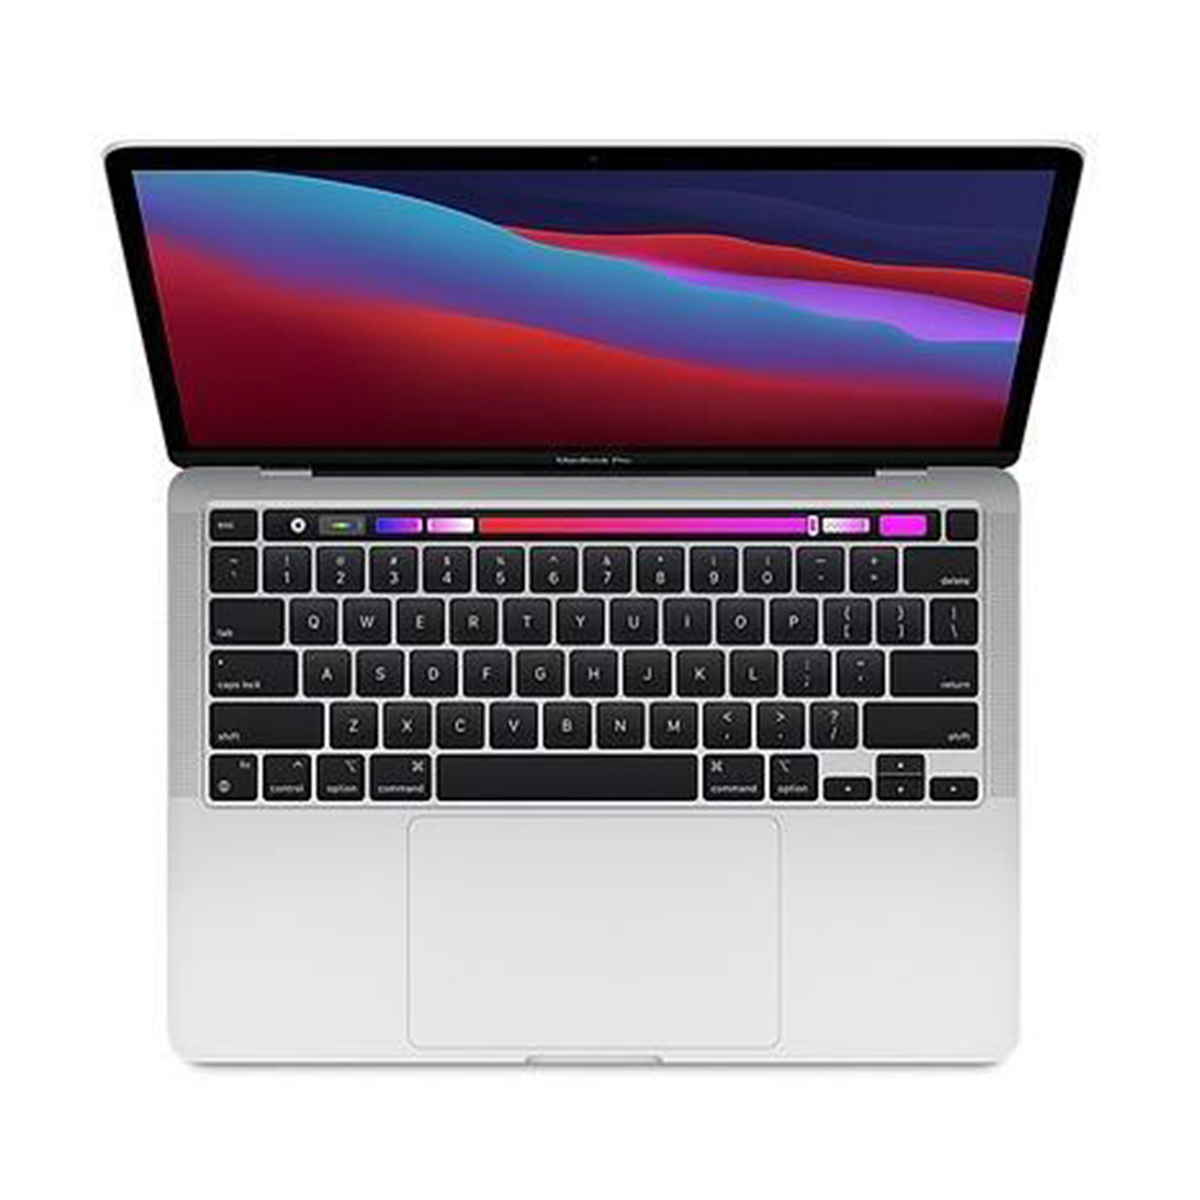 Apple MacBook Pro MYDC2B/A With Touch Bar and Touch ID,M1 Chip,8GB RAM,512GB SSD,13" Retina Display,Silver